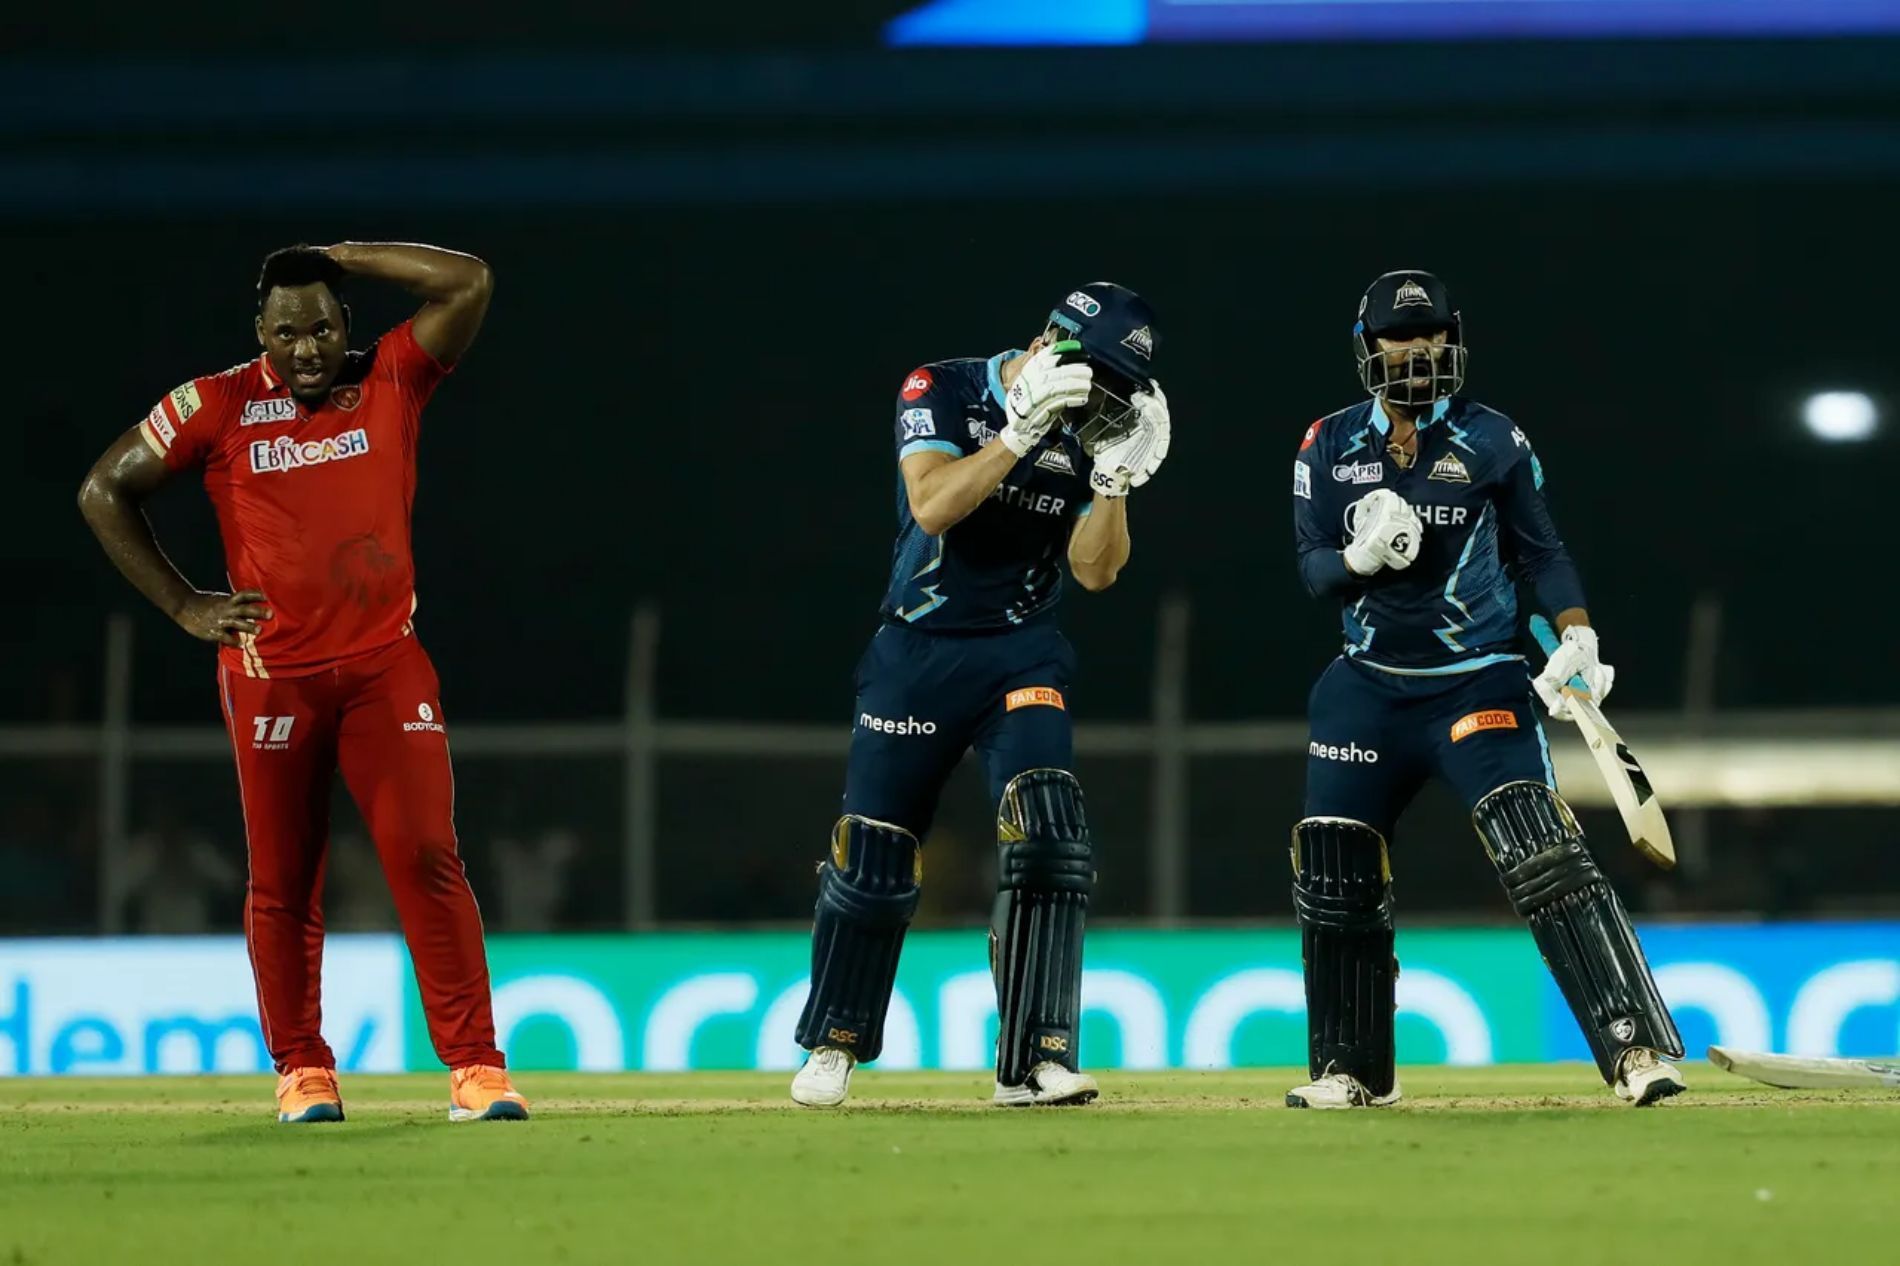 Odean Smith (left) and Rahul Tewatia (right) react after the latter clubs the former for two sixes off the last two balls in Match 16 between PBKS and GT.